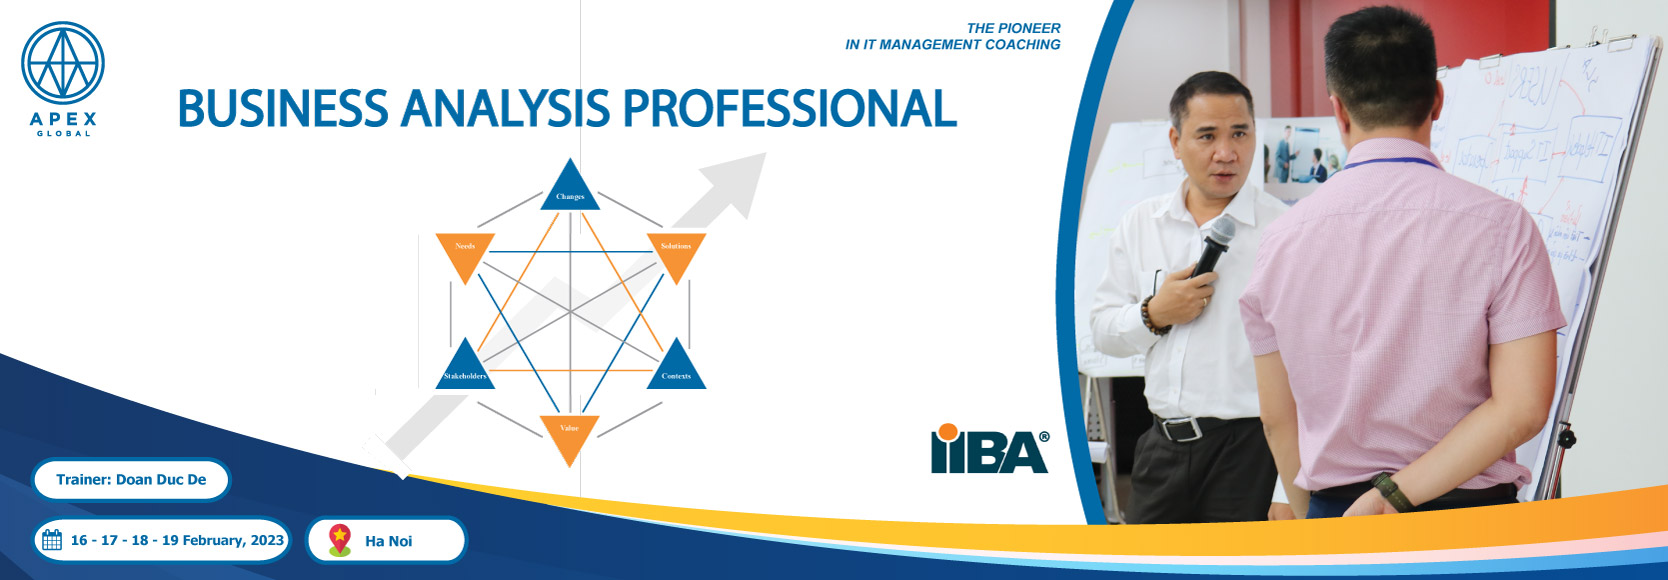 Business-Analysis-Professional-Apex-Global